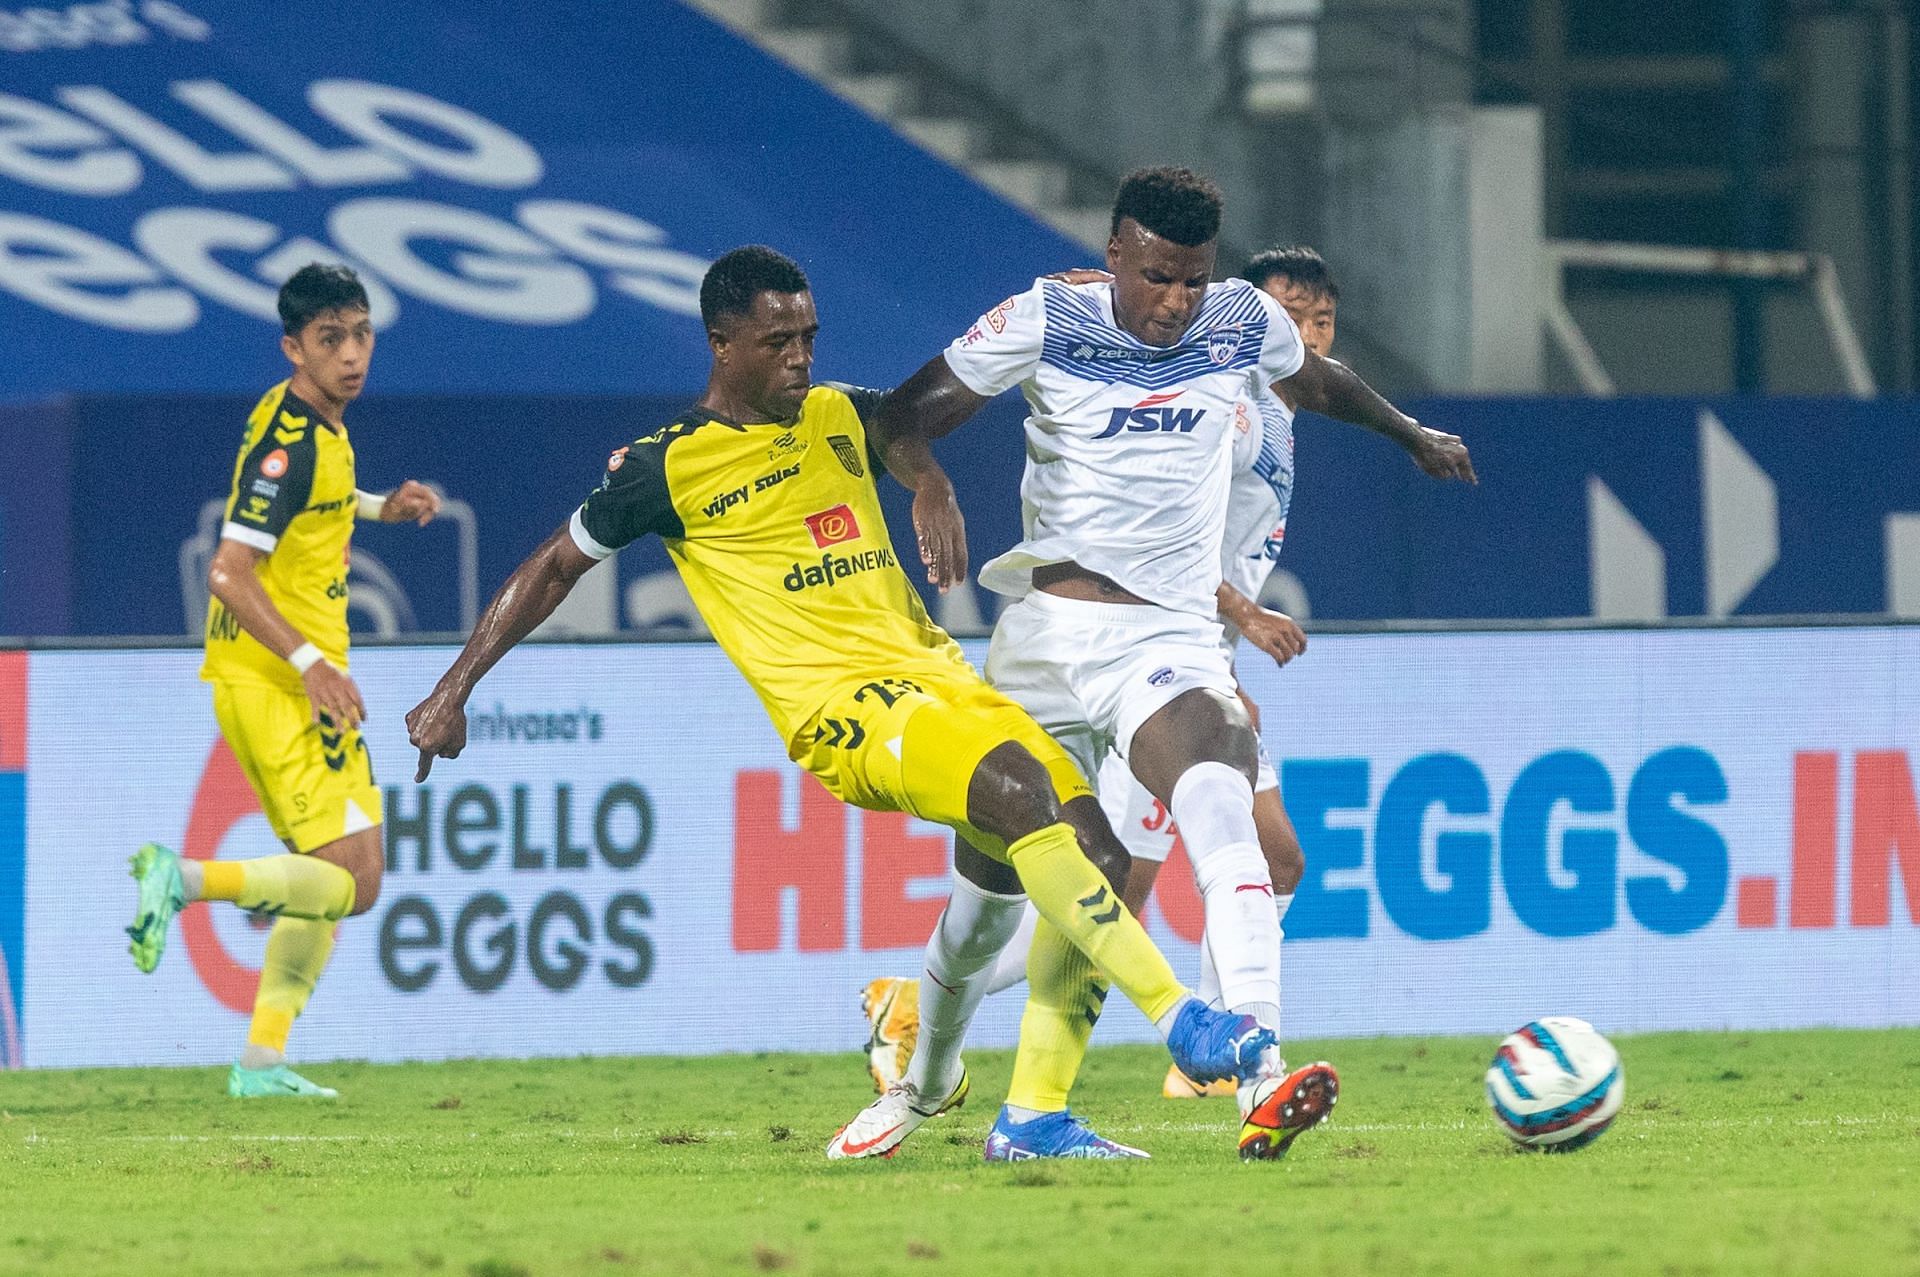 Hyderabad FC&#039;s Ogbeche and Bengaluru FC&#039;s Ramires vying for the ball (Image Courtesy: ISL)